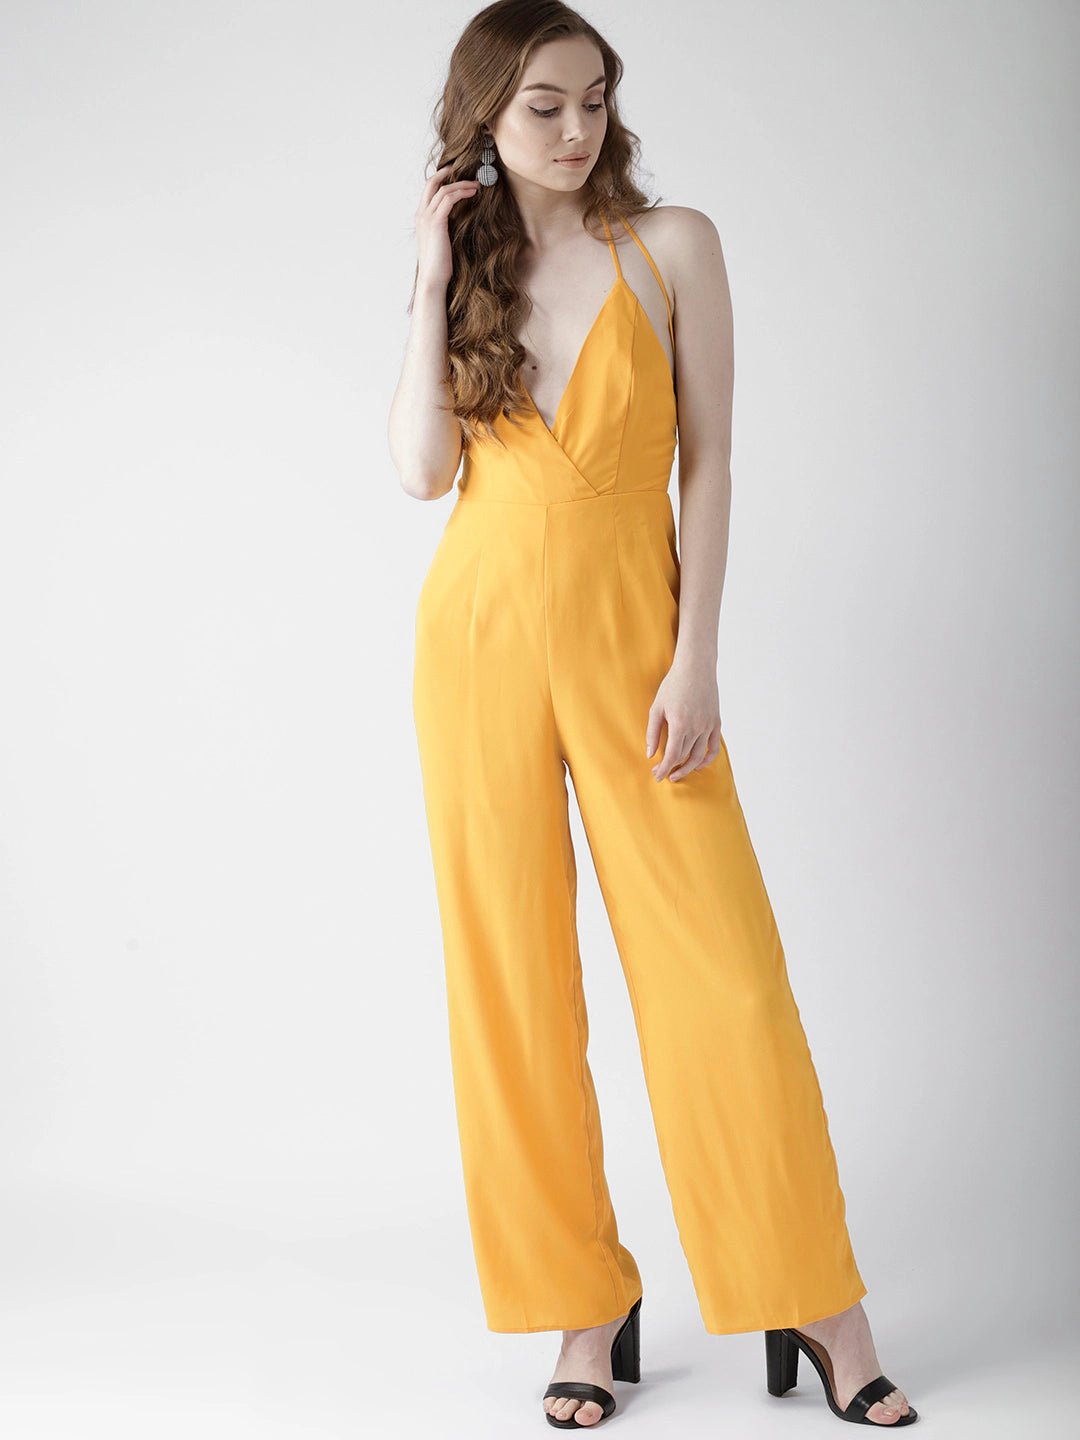 MUSTARD YELLOW JUMPSUIT SIZE UK 8 - NOTHING TO WEAR | NEW & PRE-LOVED FASHION | UAE